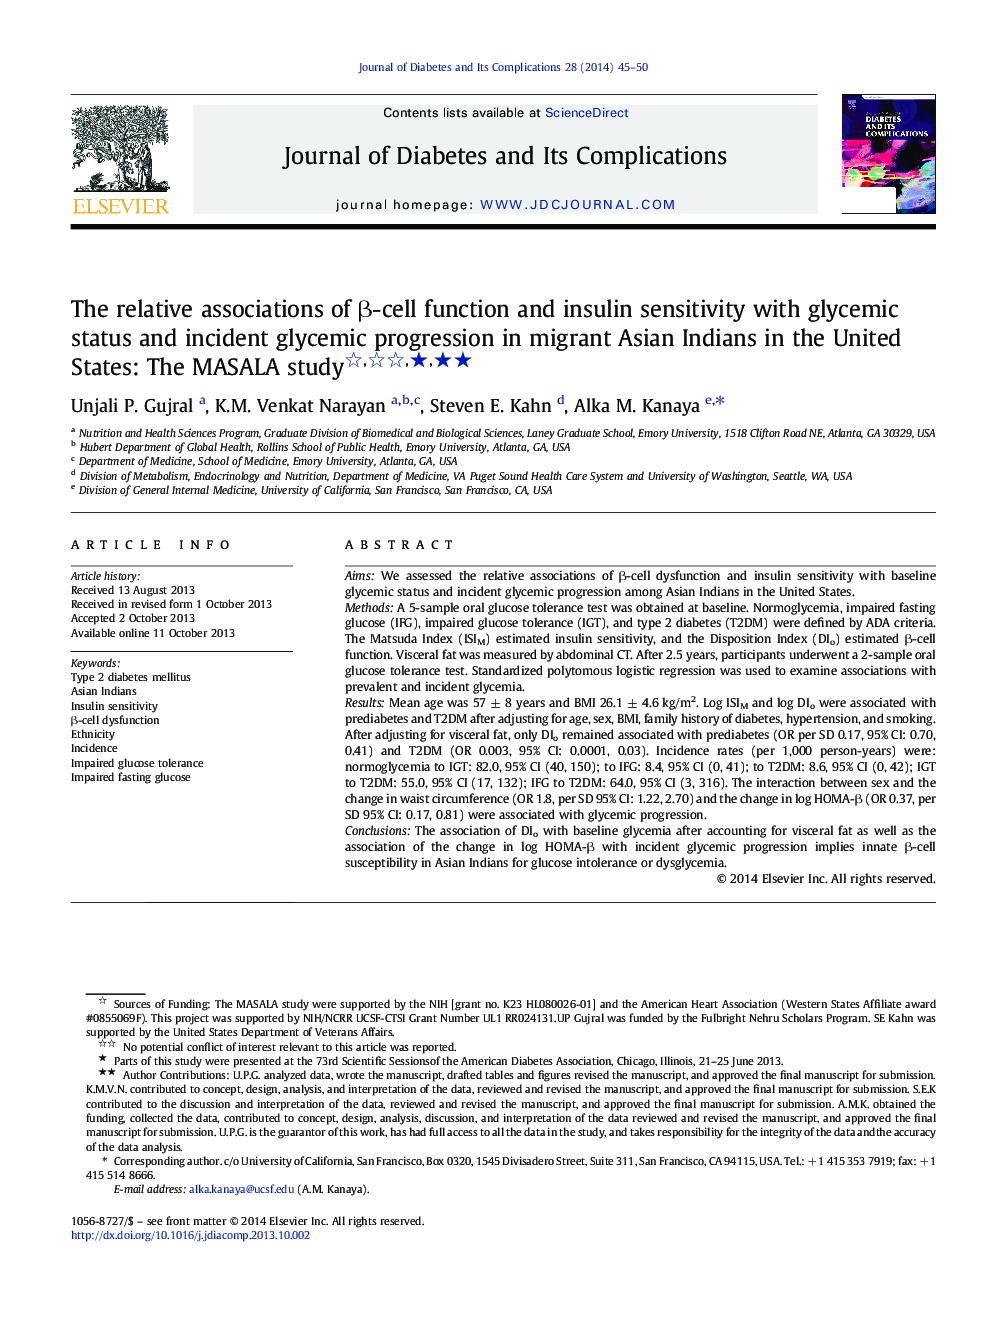 The relative associations of Î²-cell function and insulin sensitivity with glycemic status and incident glycemic progression in migrant Asian Indians in the United States: The MASALA studyâââ